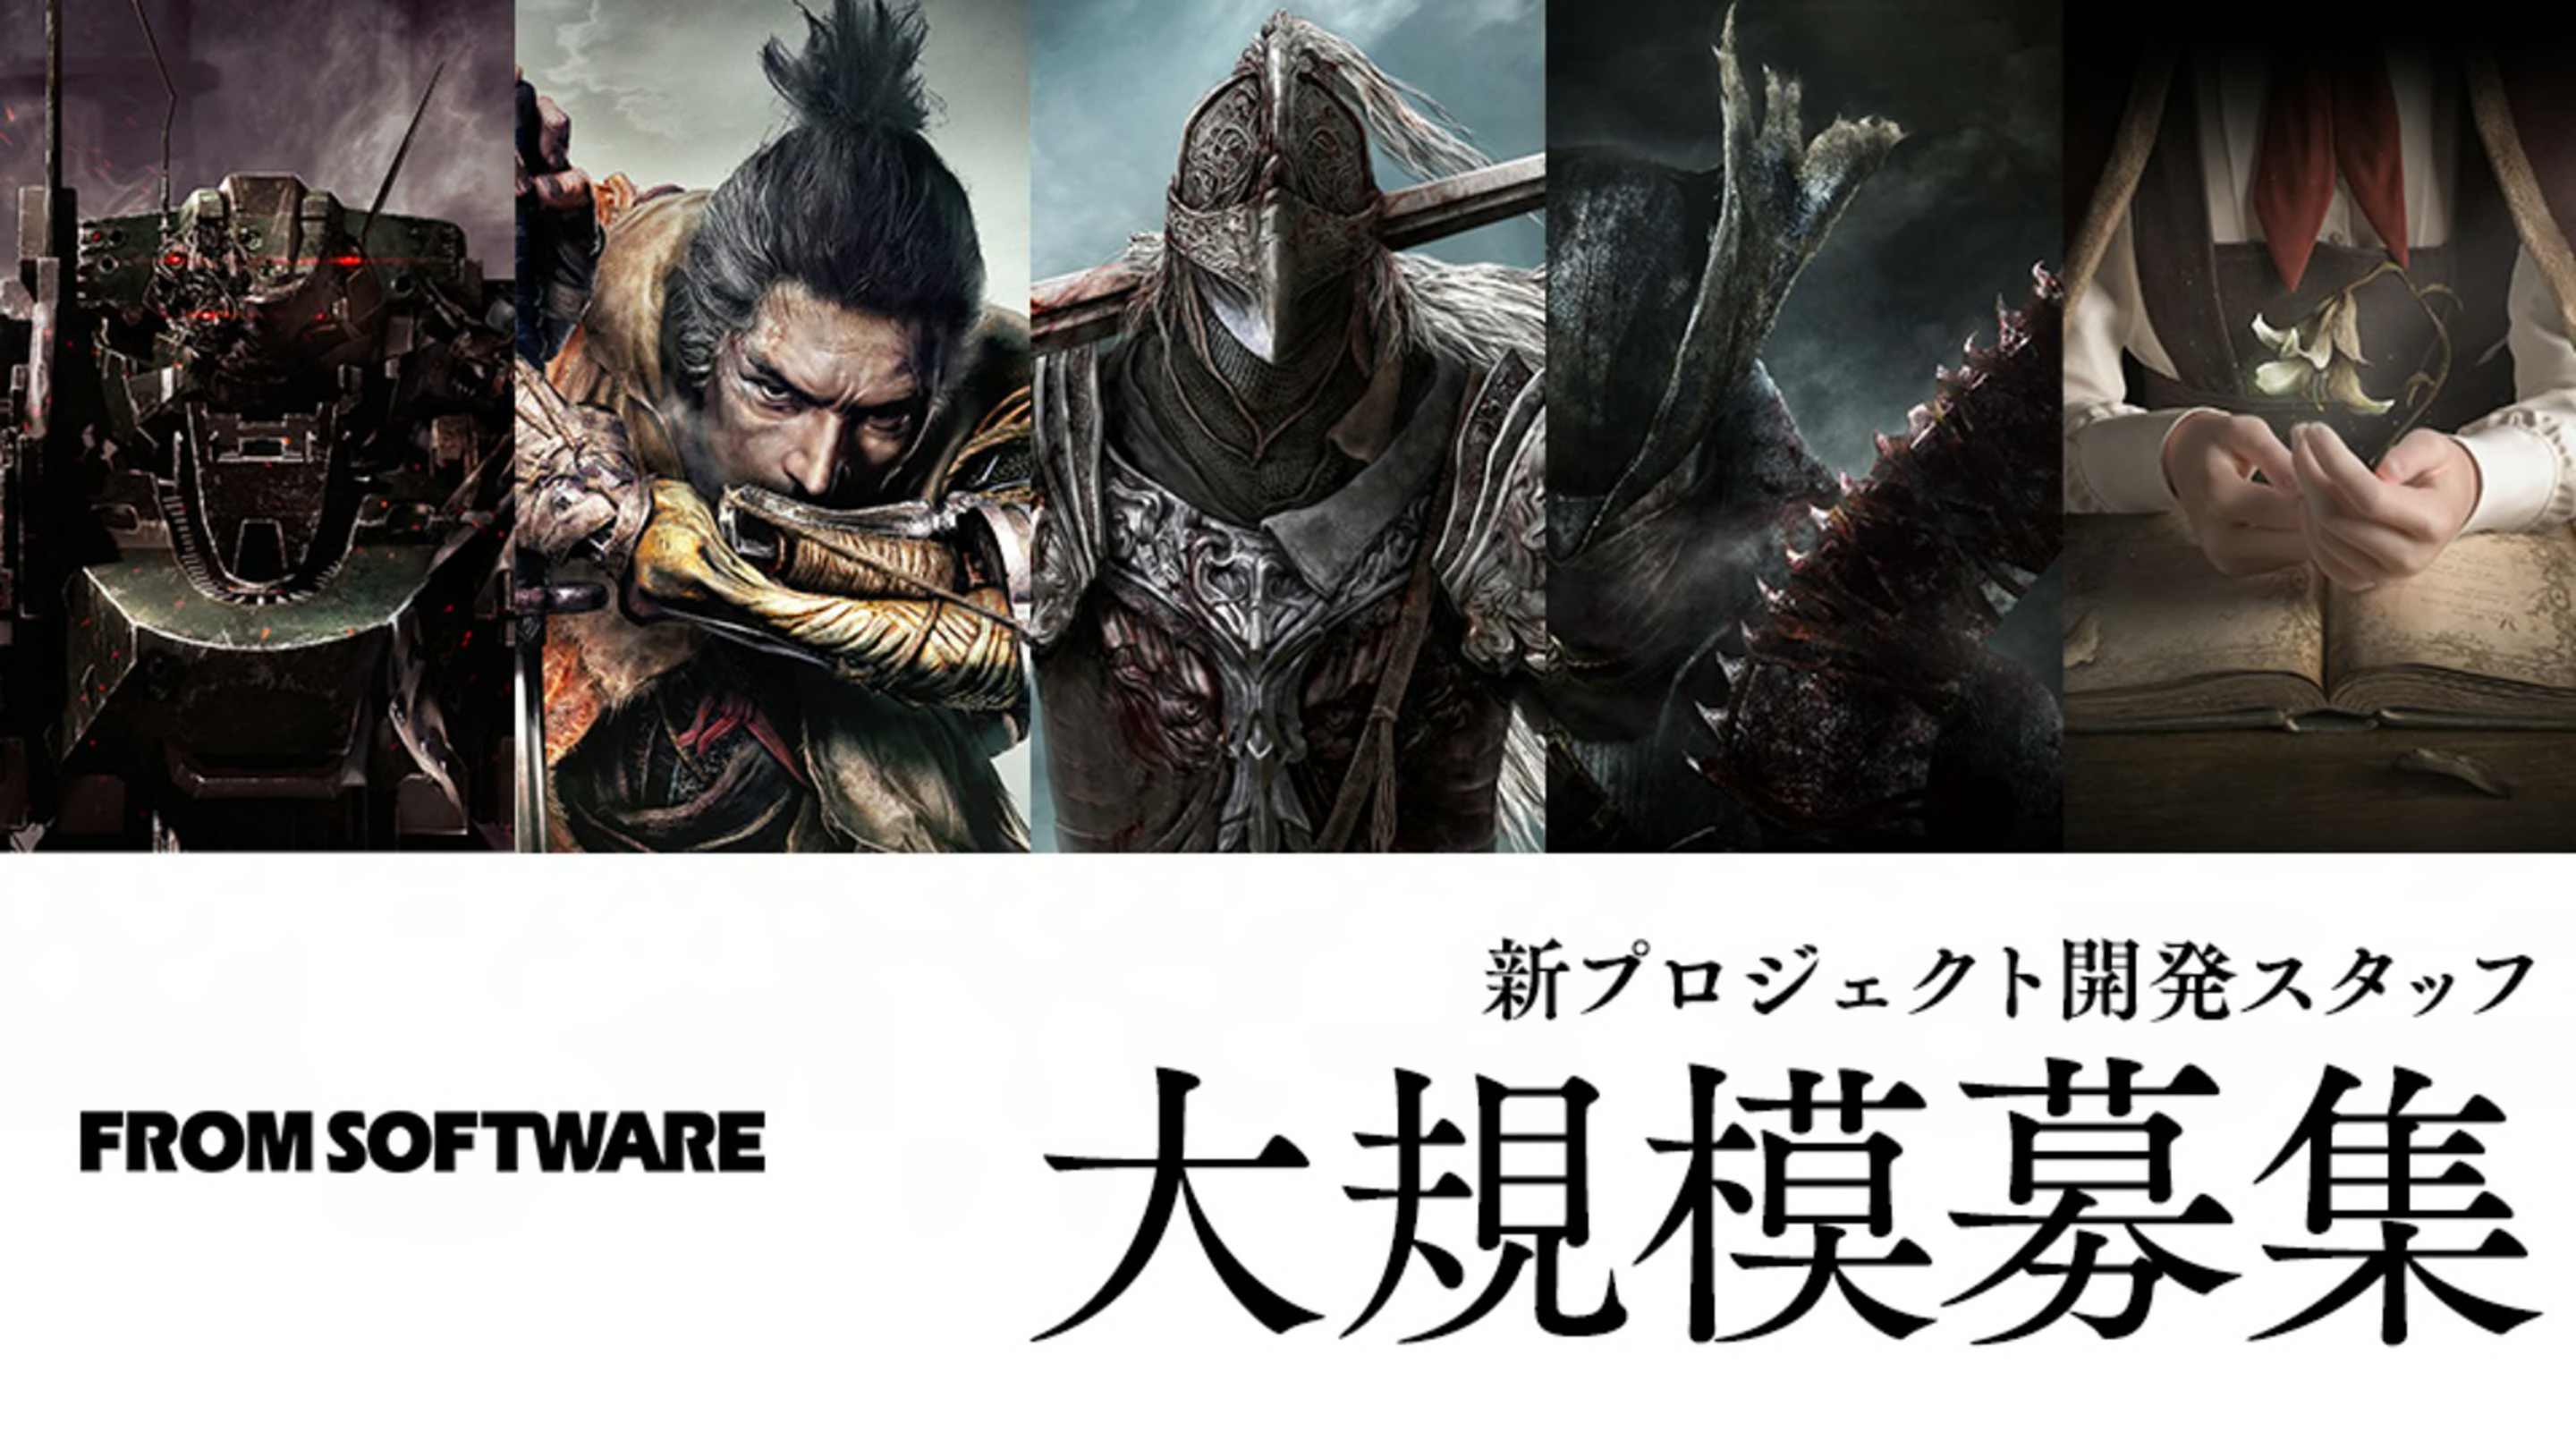 FromSoftware Reportedly Near Done With Next Game, Hiring for 'Several New Projects'